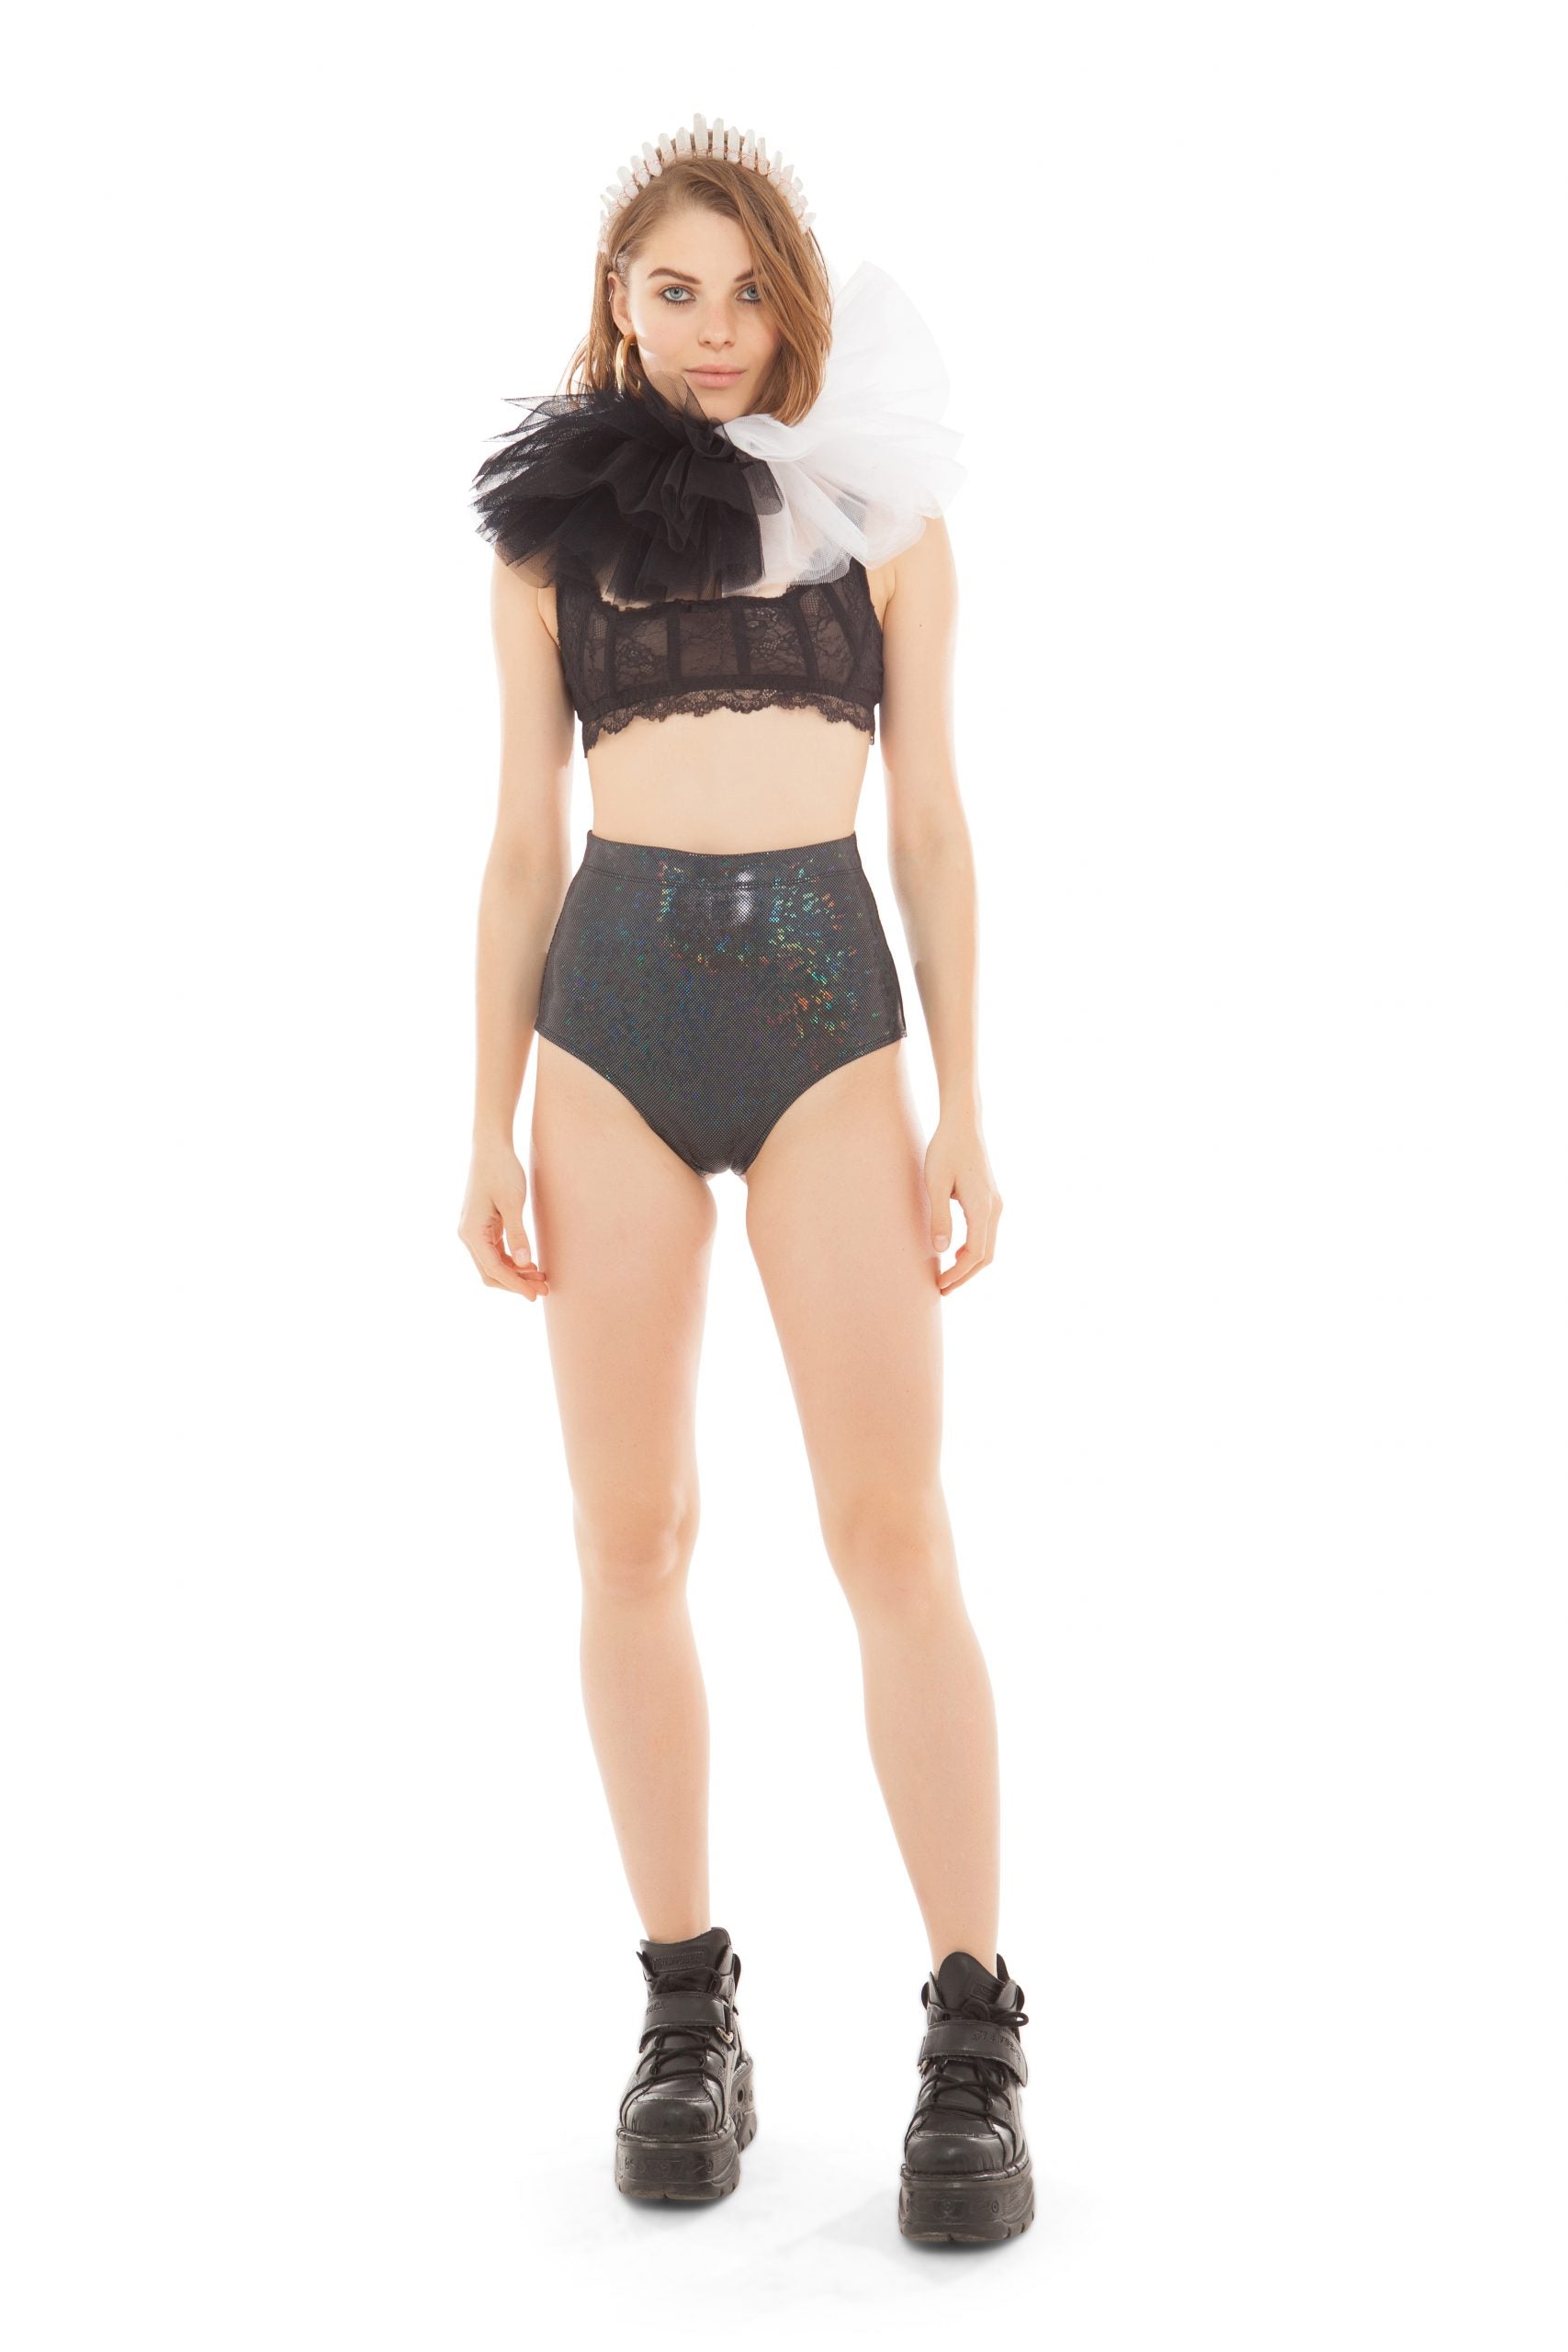 Black Holographic High Waisted Hot Pants by Sea Dragon Studio